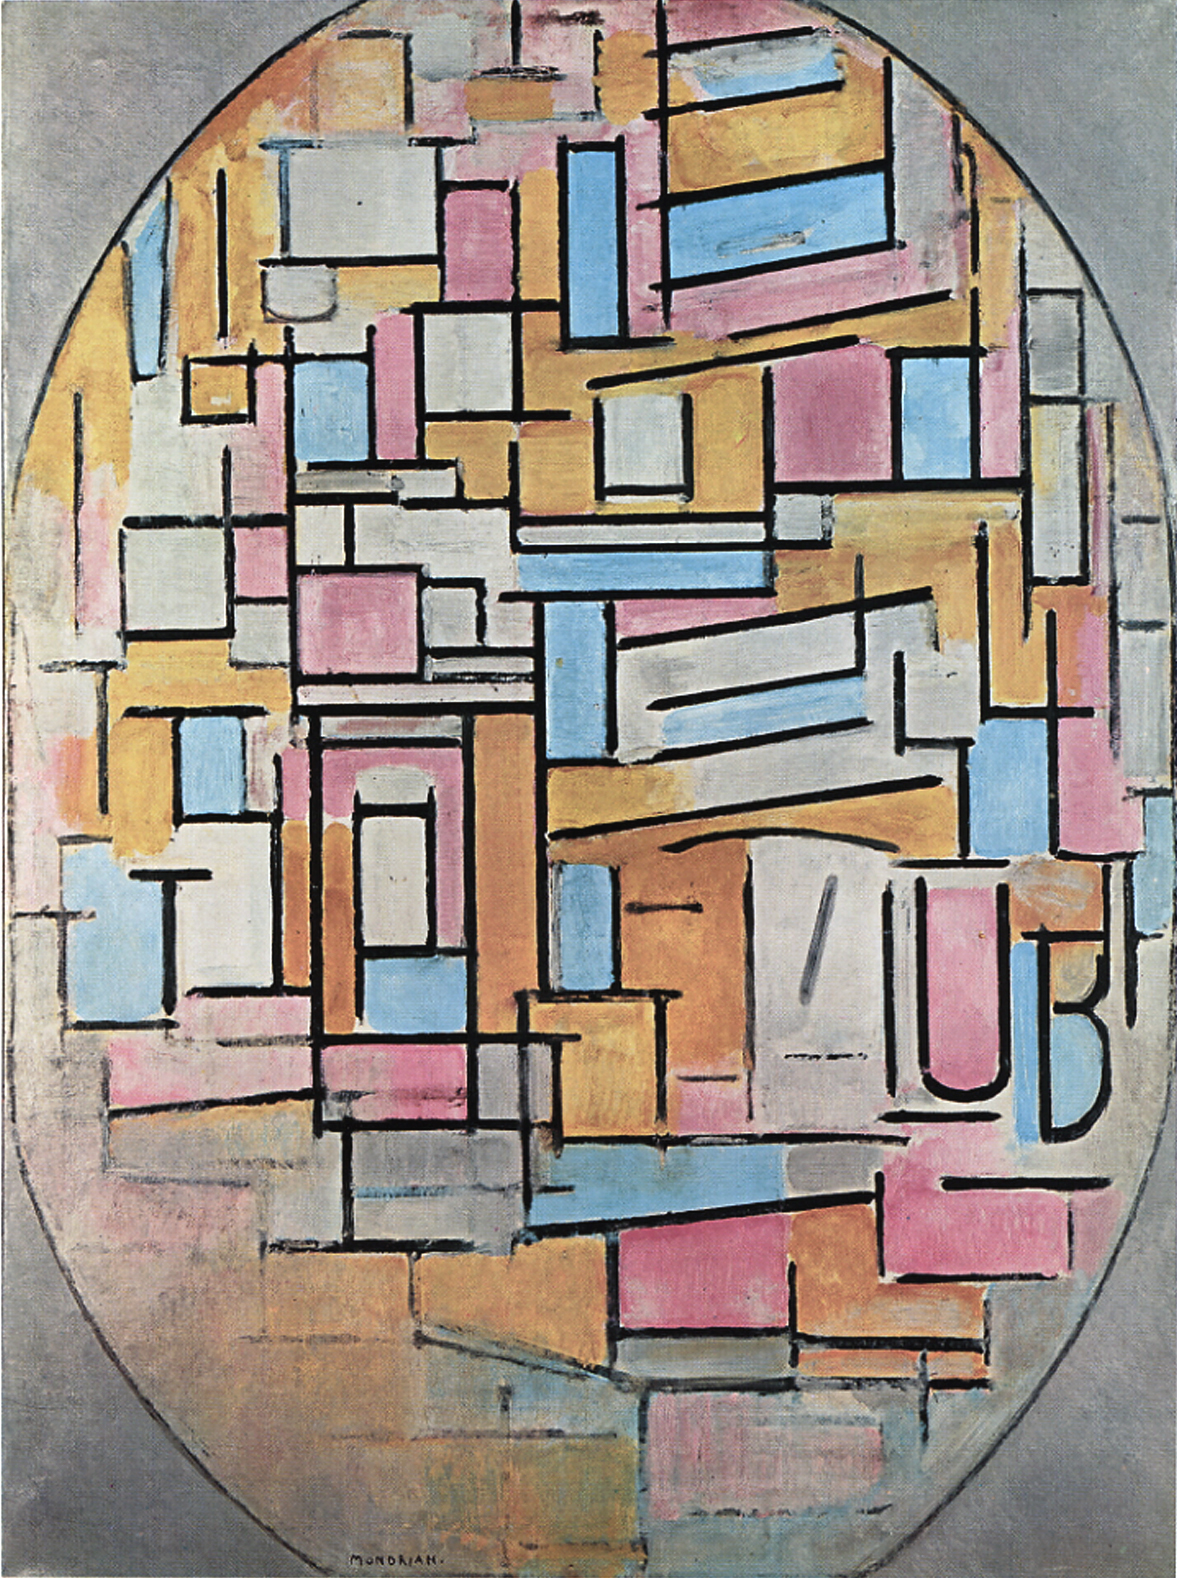 Composition in Oval with Color Planes 2, 1914, Piet Mondrian